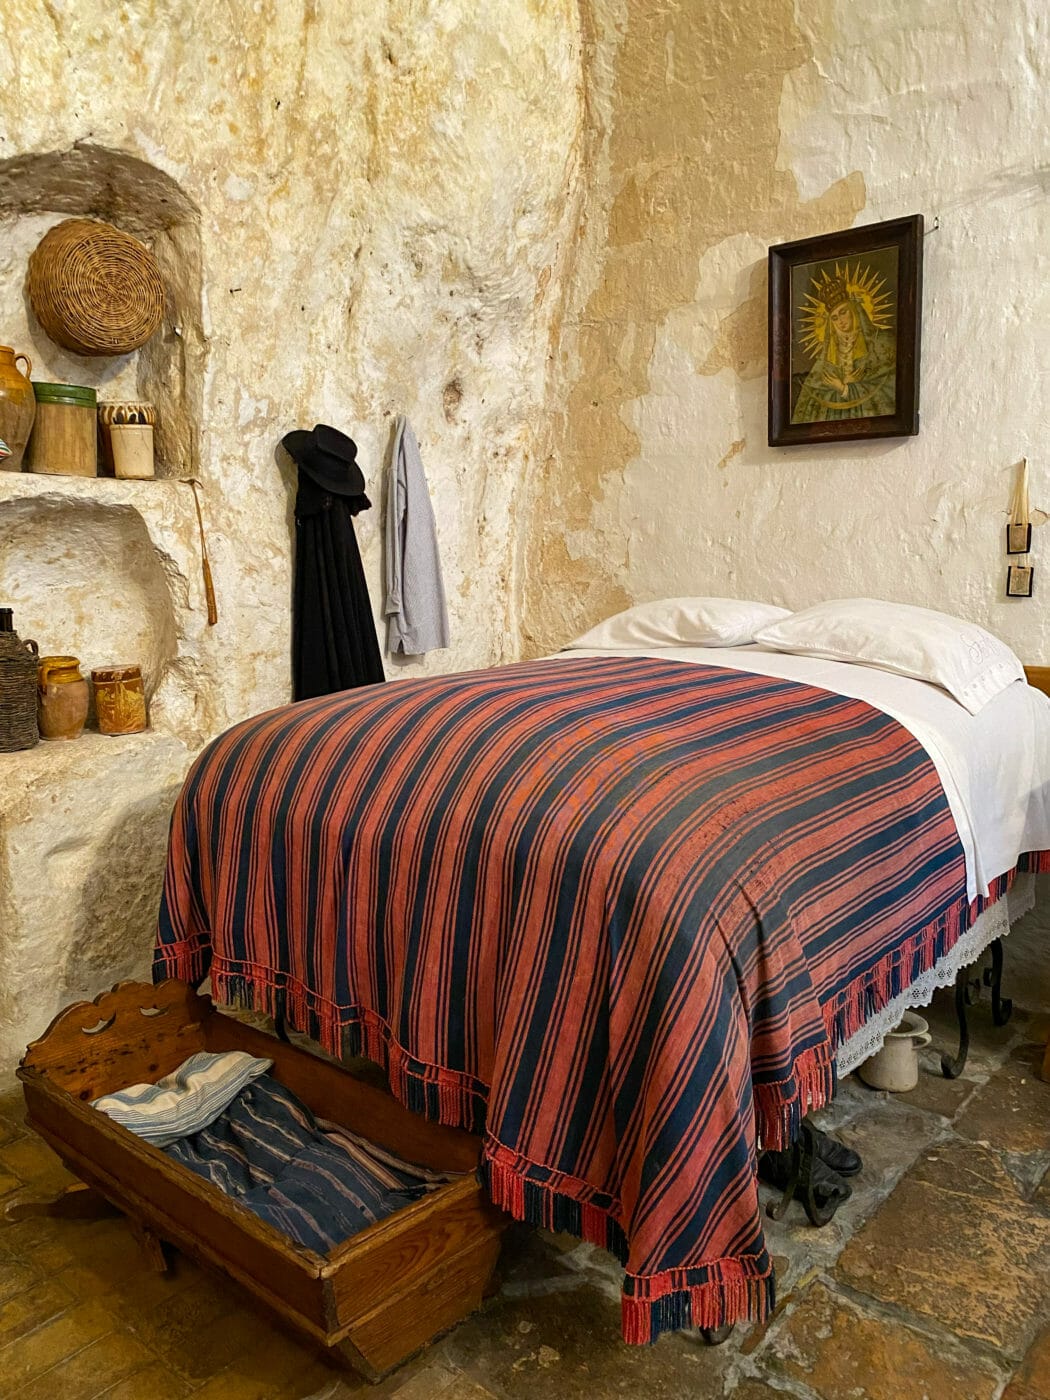 the interior of a typical cave dwelling of the 1950s in matera italy